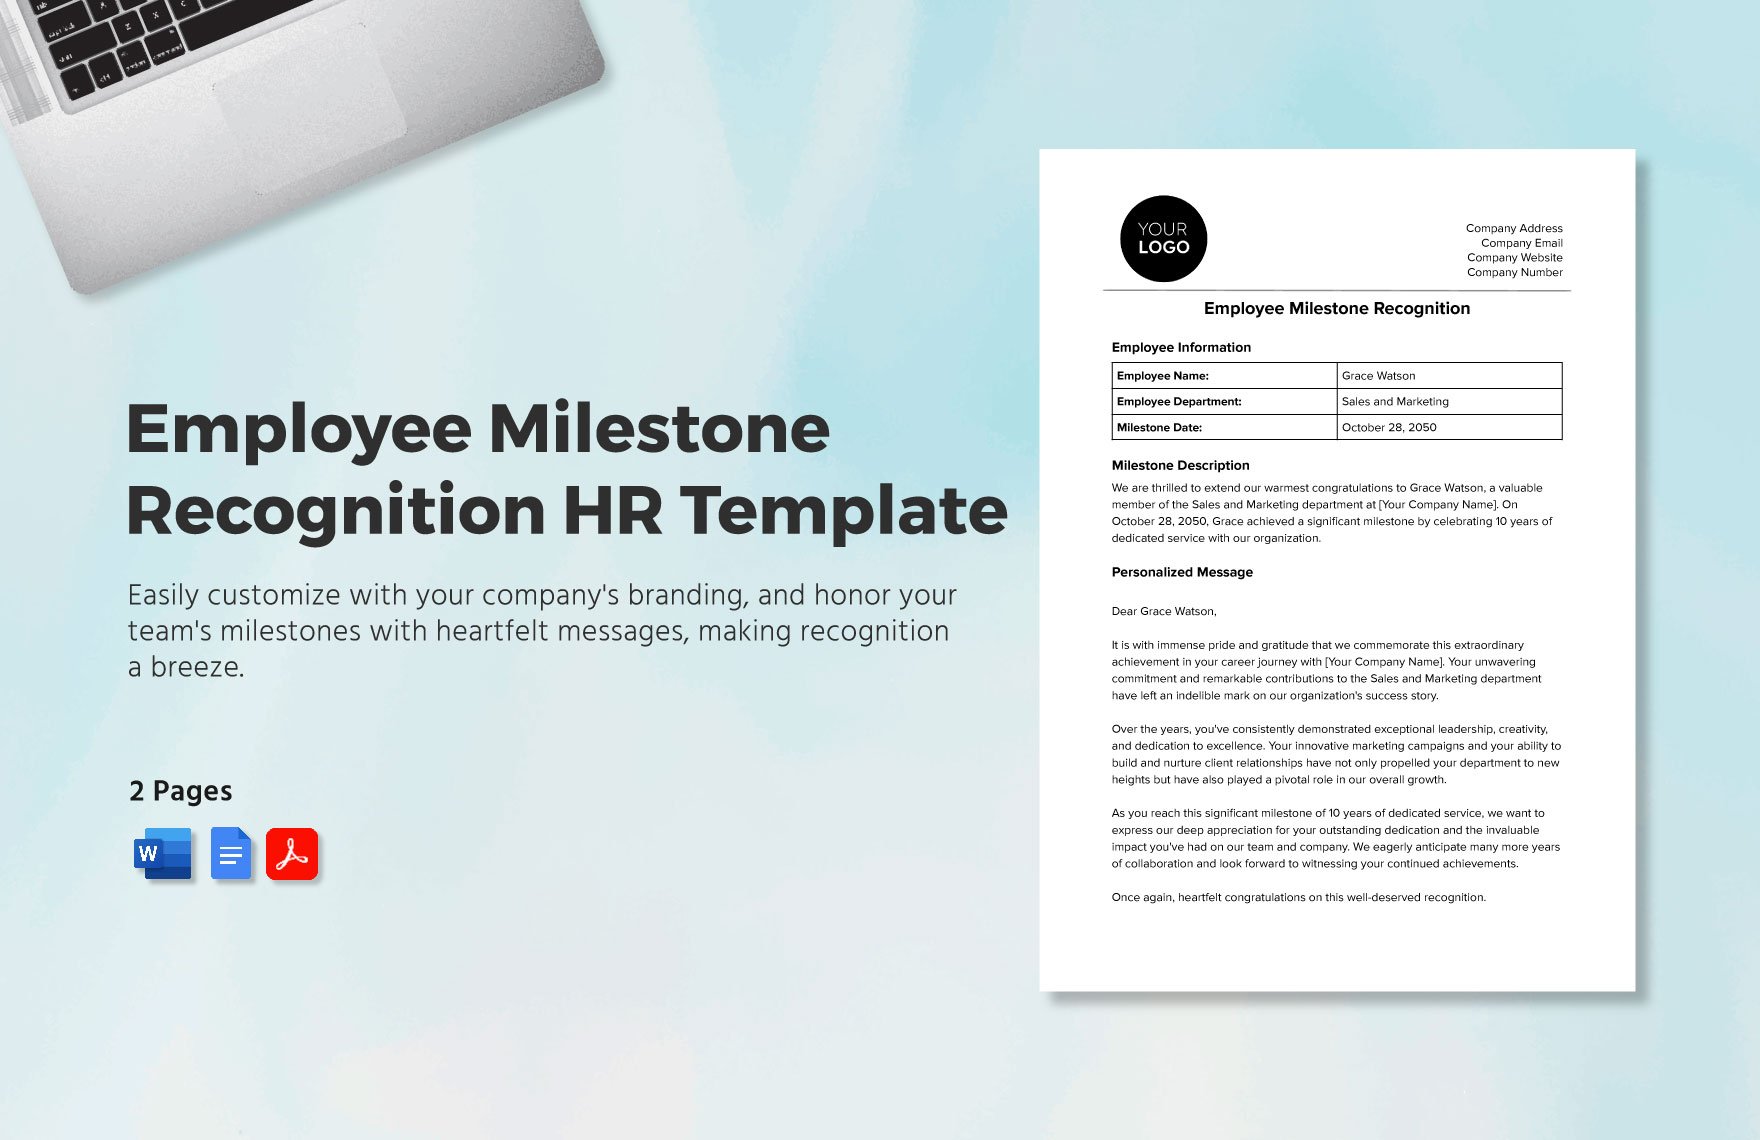 Employee Milestone Recognition HR Template